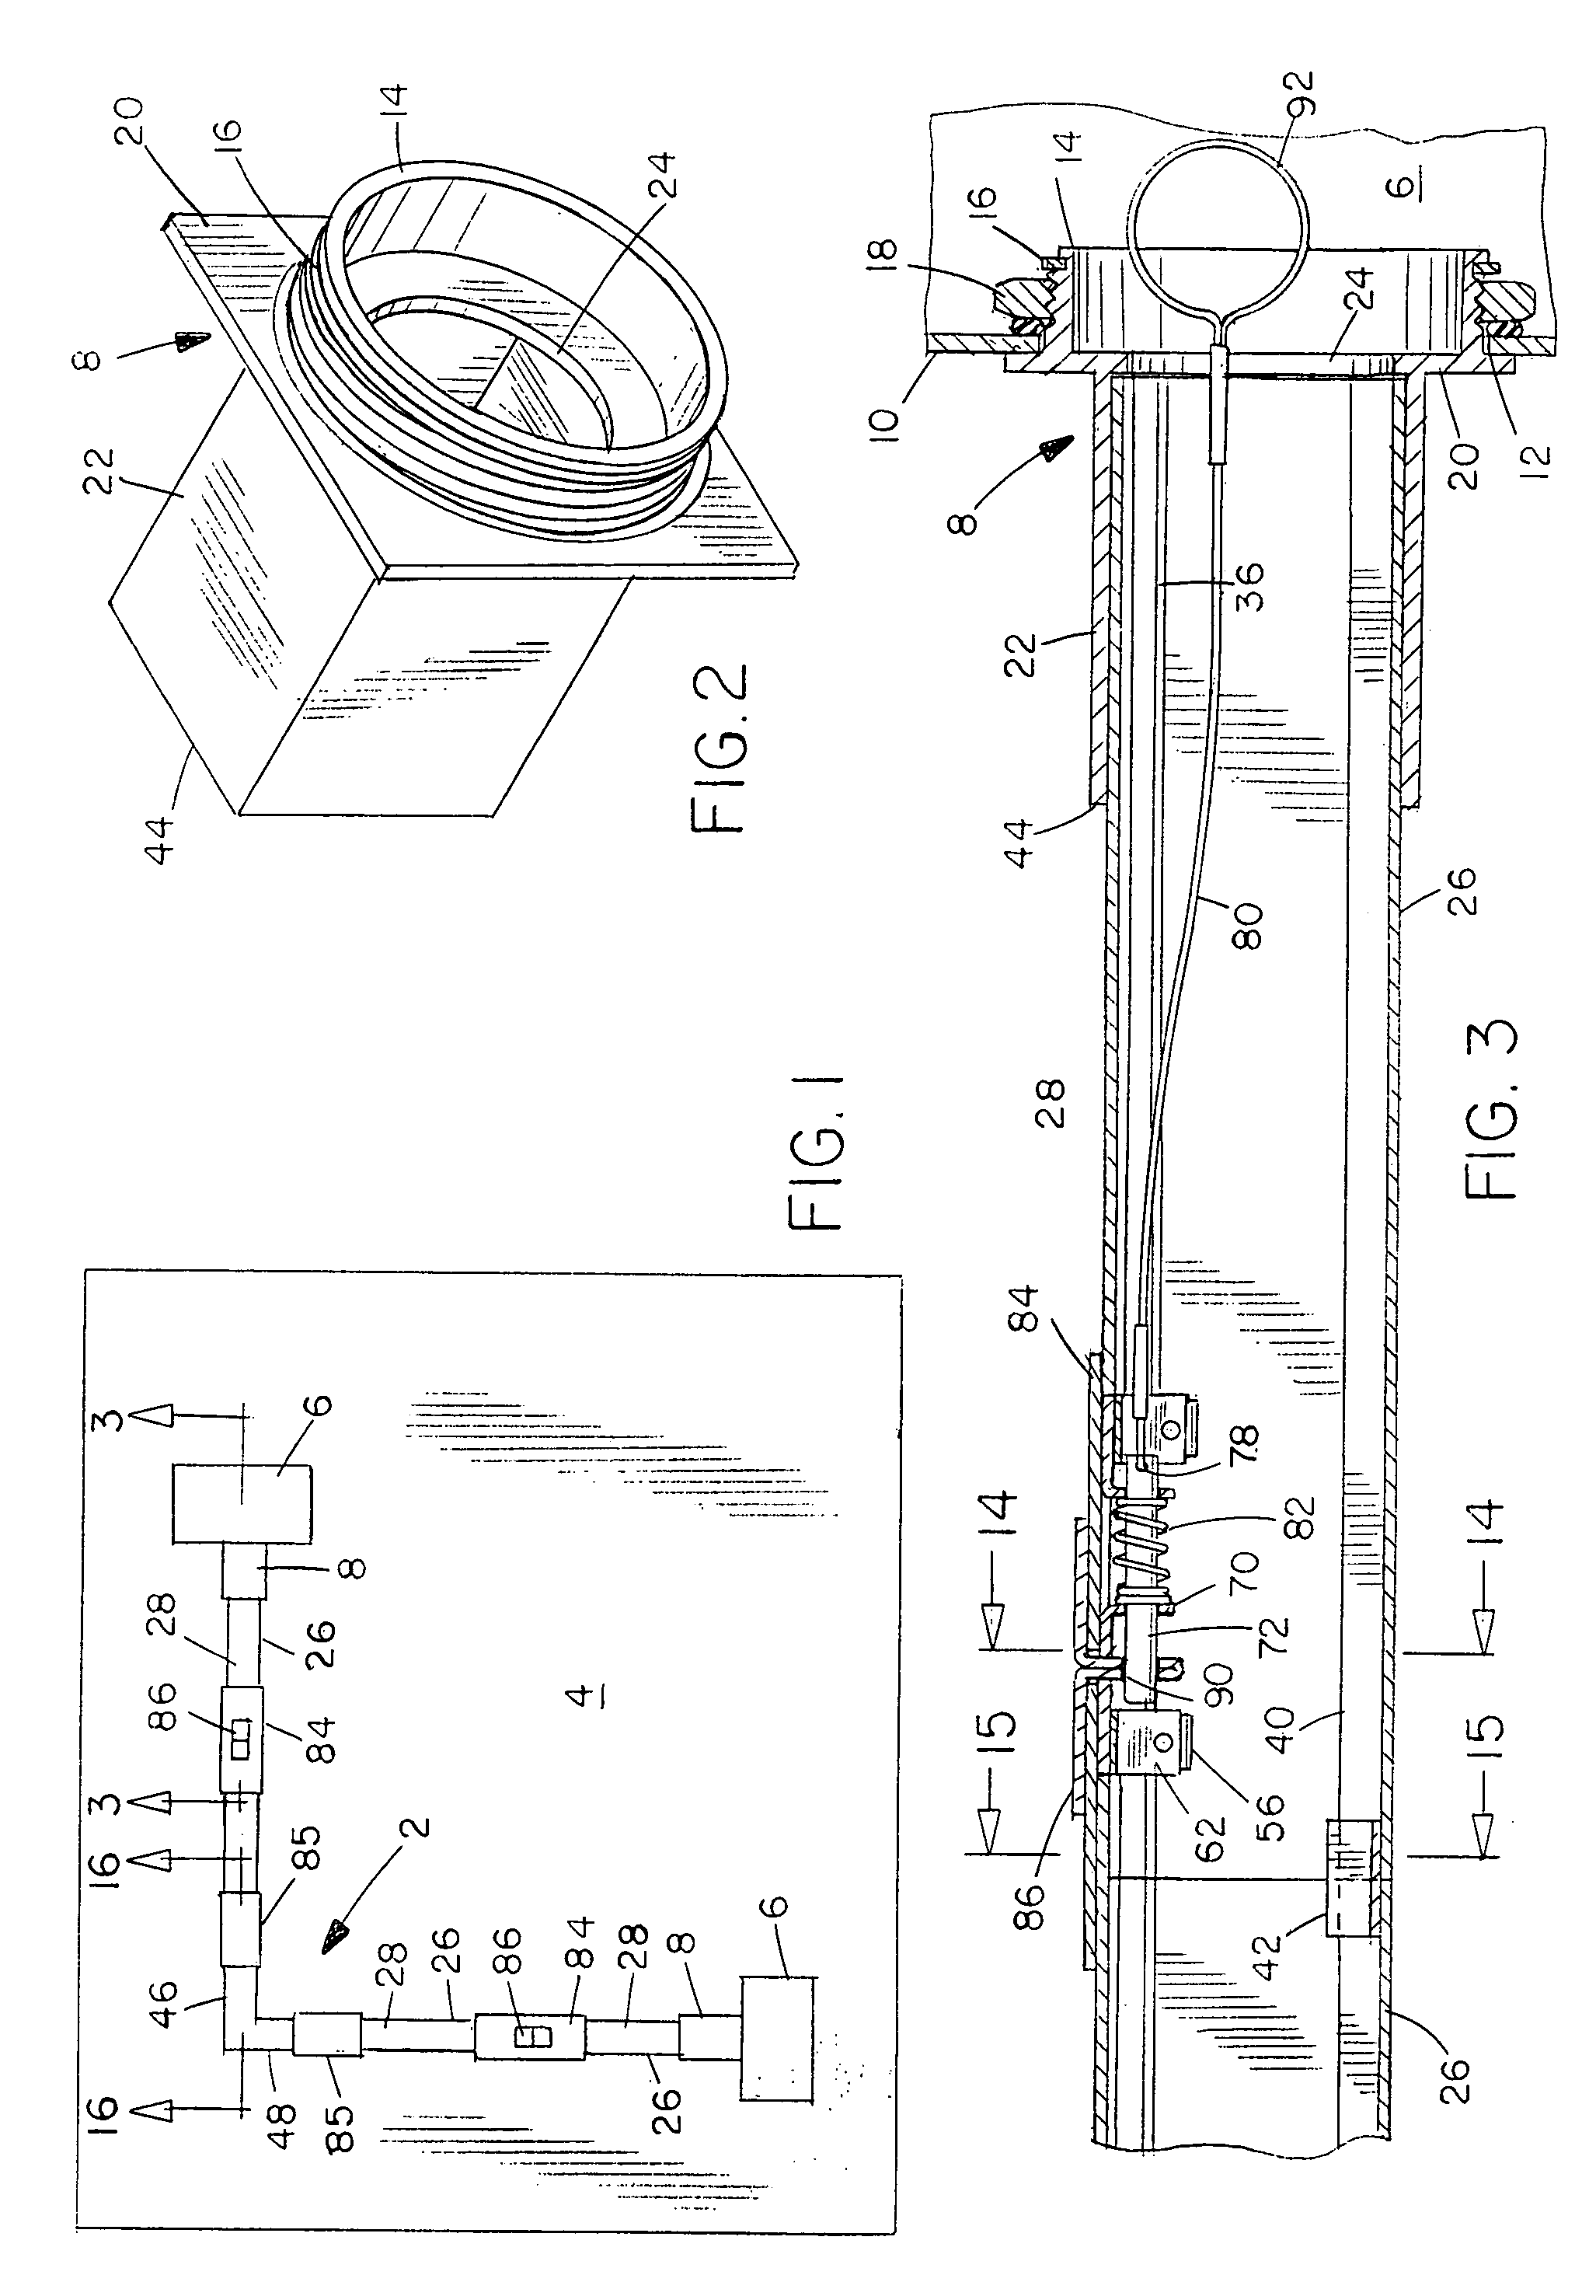 Secure conduit (pathway) system for telecommunications and communications transmission equipment, environmental analysis equipment, computer equipment and the like